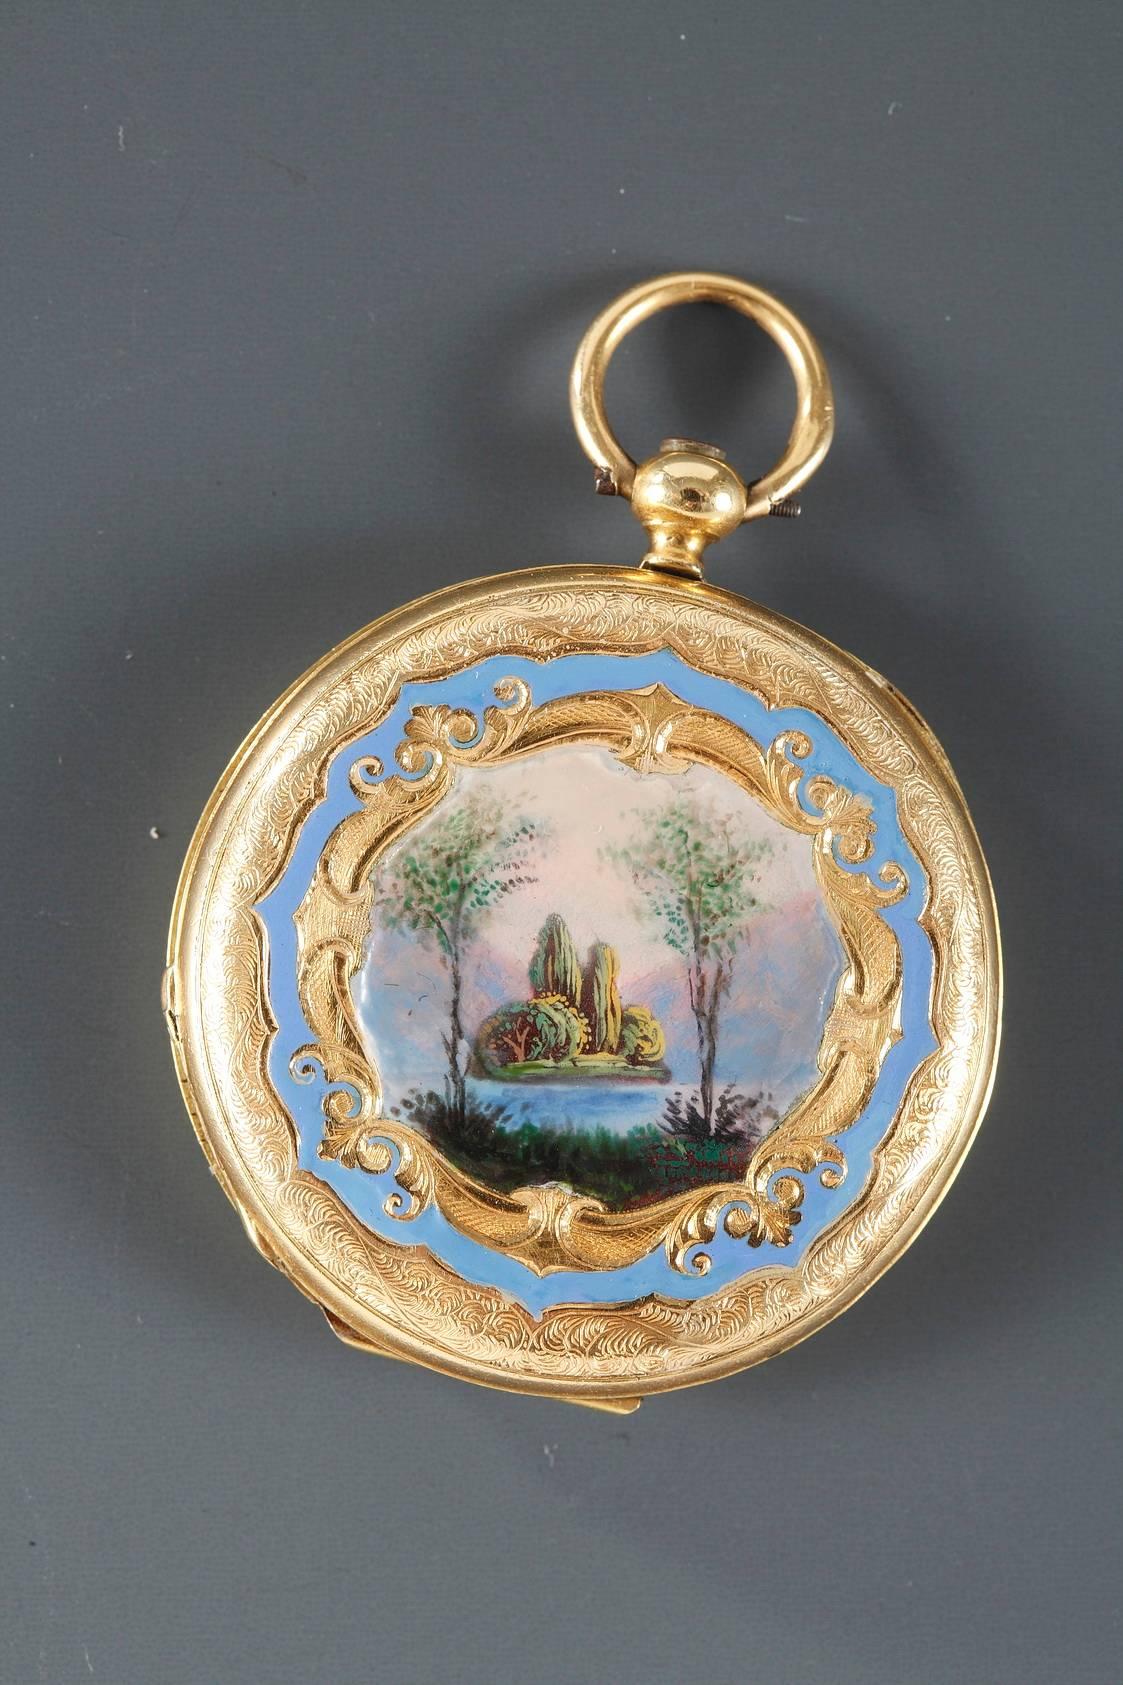 Pendant watch in gold and enamel decorated with an interior scene on one side and a landscape on the other. The scenes are framed in foliage and gold crosshatching on a sky blue background. They are inspired by Jean-Jacques Rouseau’s treatise,